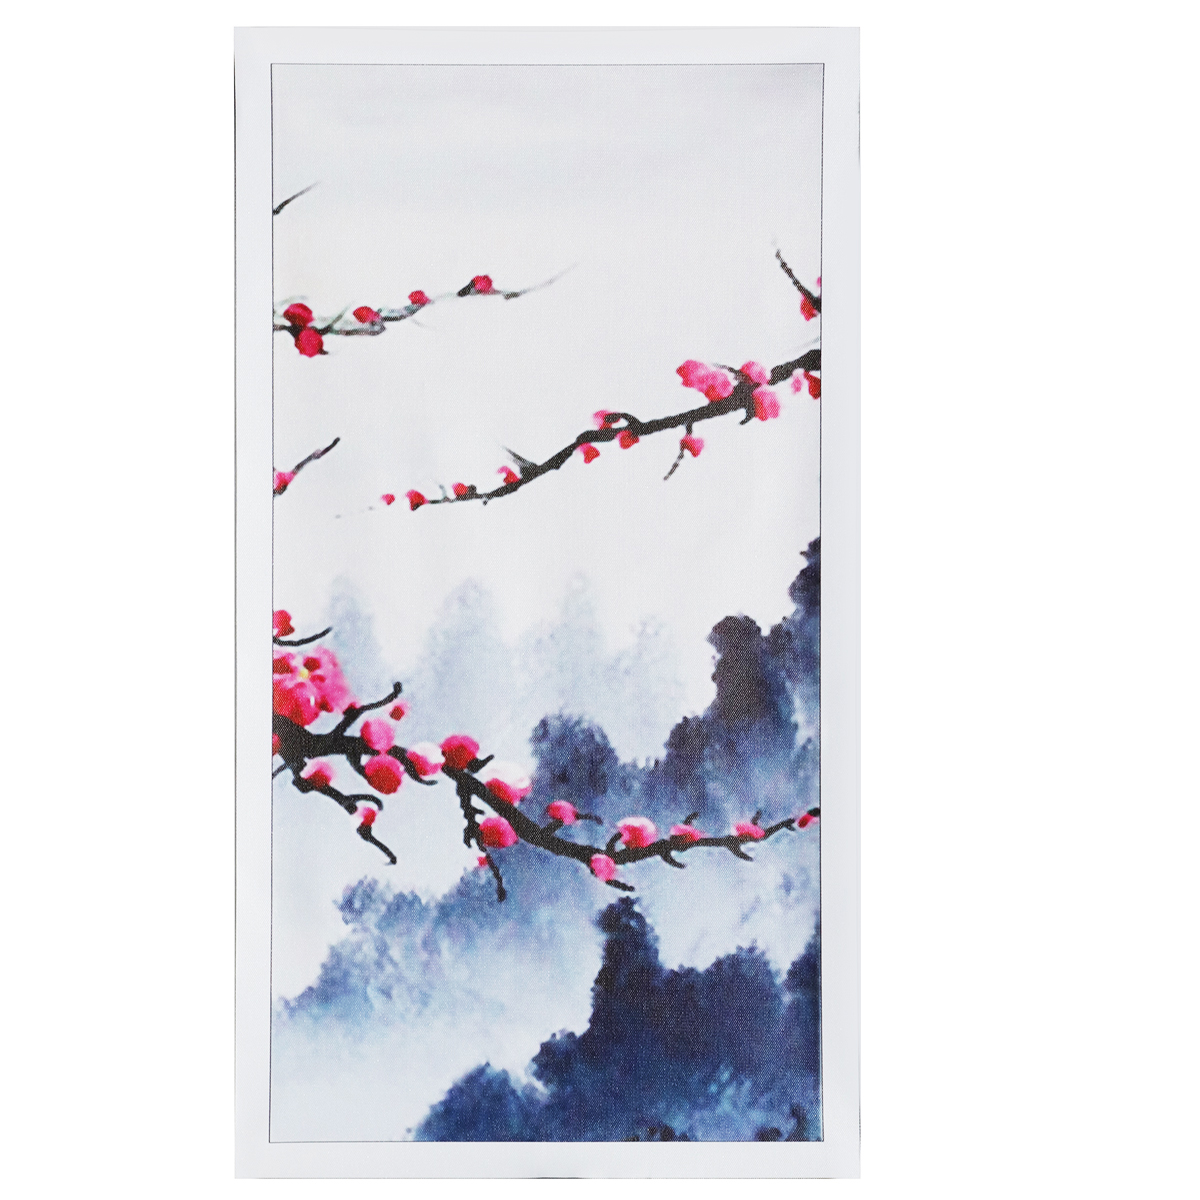 4-Pcs-Wall-Decorative-Painting-Modern-Abstract-Wall-Decor-Plum-Blossom-Art-Pictures-Canvas-Prints-Ho-1319561-9